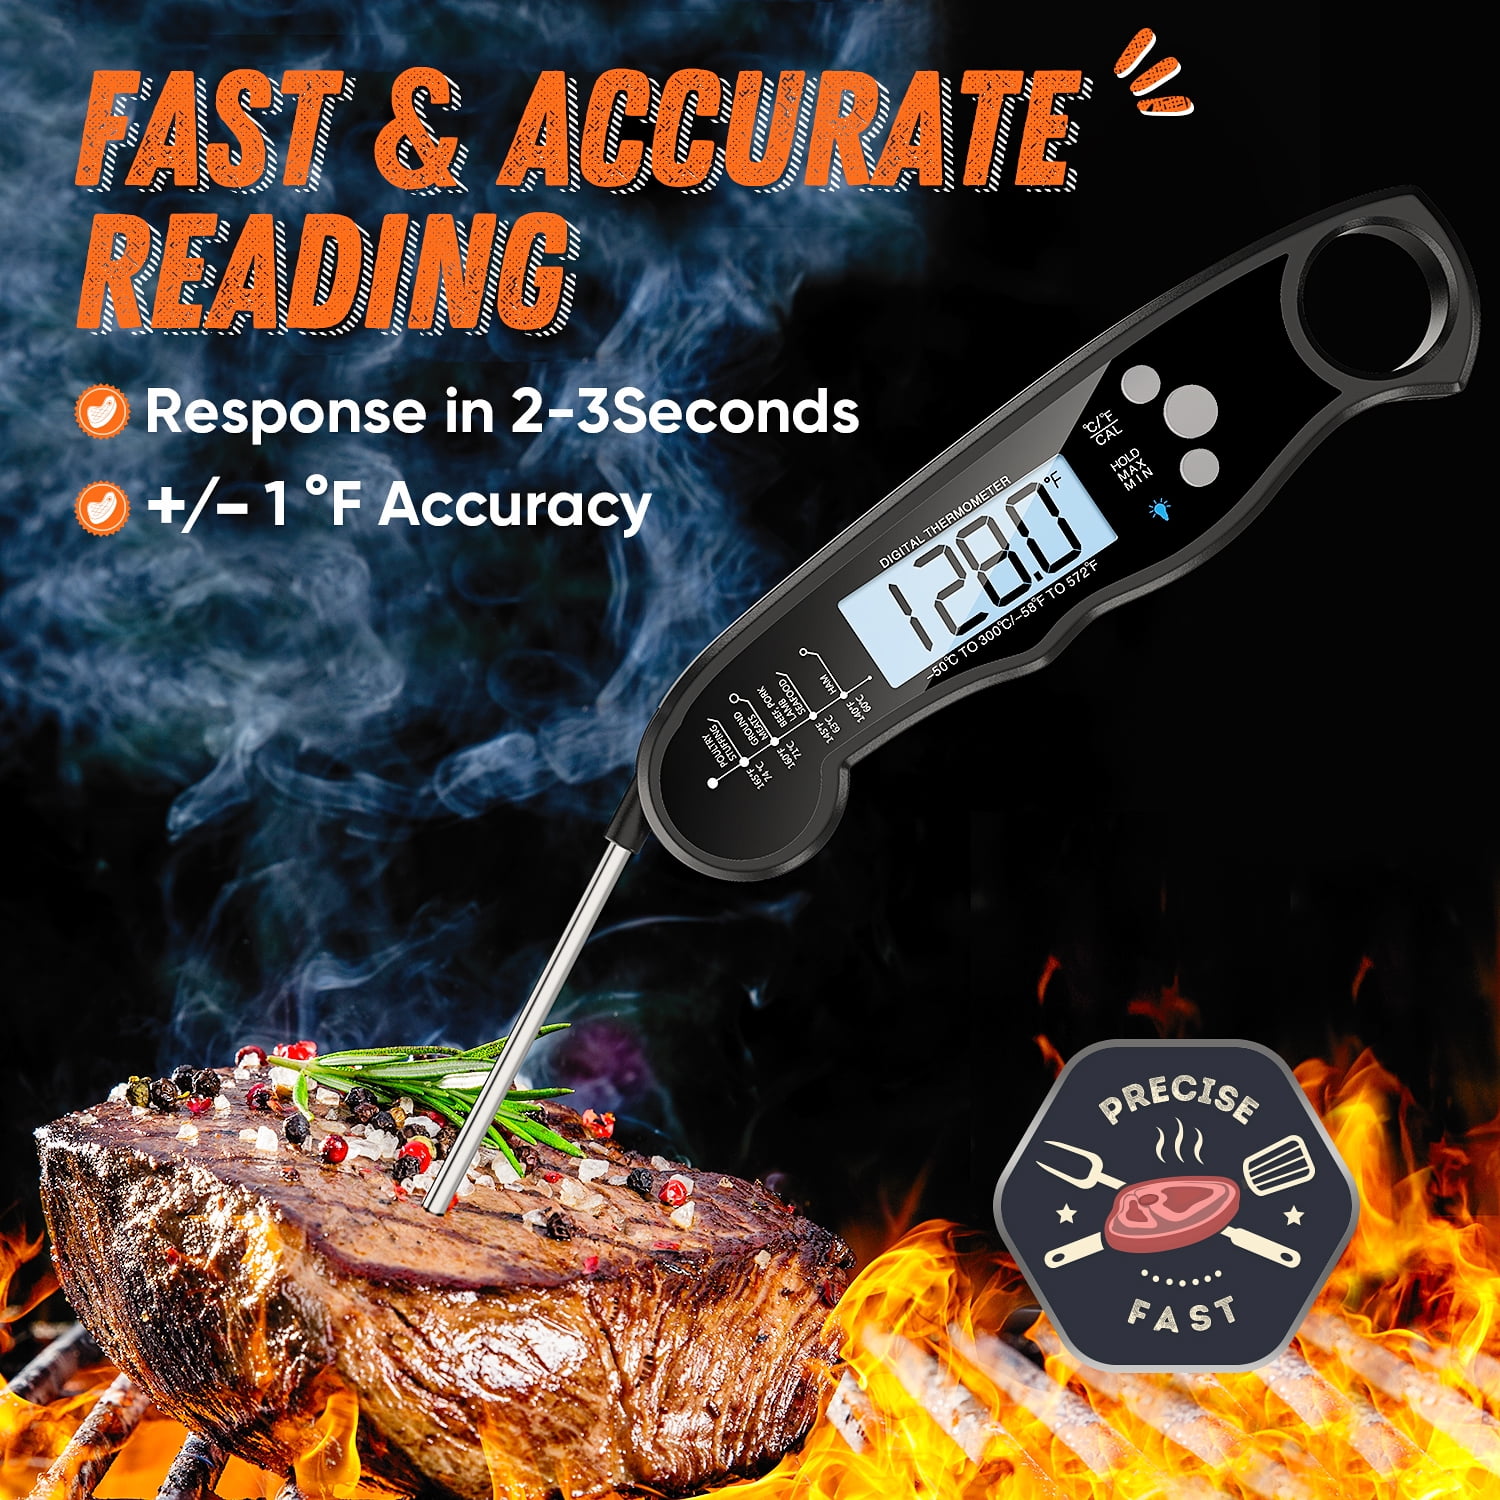 Instant Read Meat Thermometer for Grill and Cooking, Fast and Accurate Digital Food Thermometer with Backlit Bi-Fold Probe for Kitchen Ovens, Frying